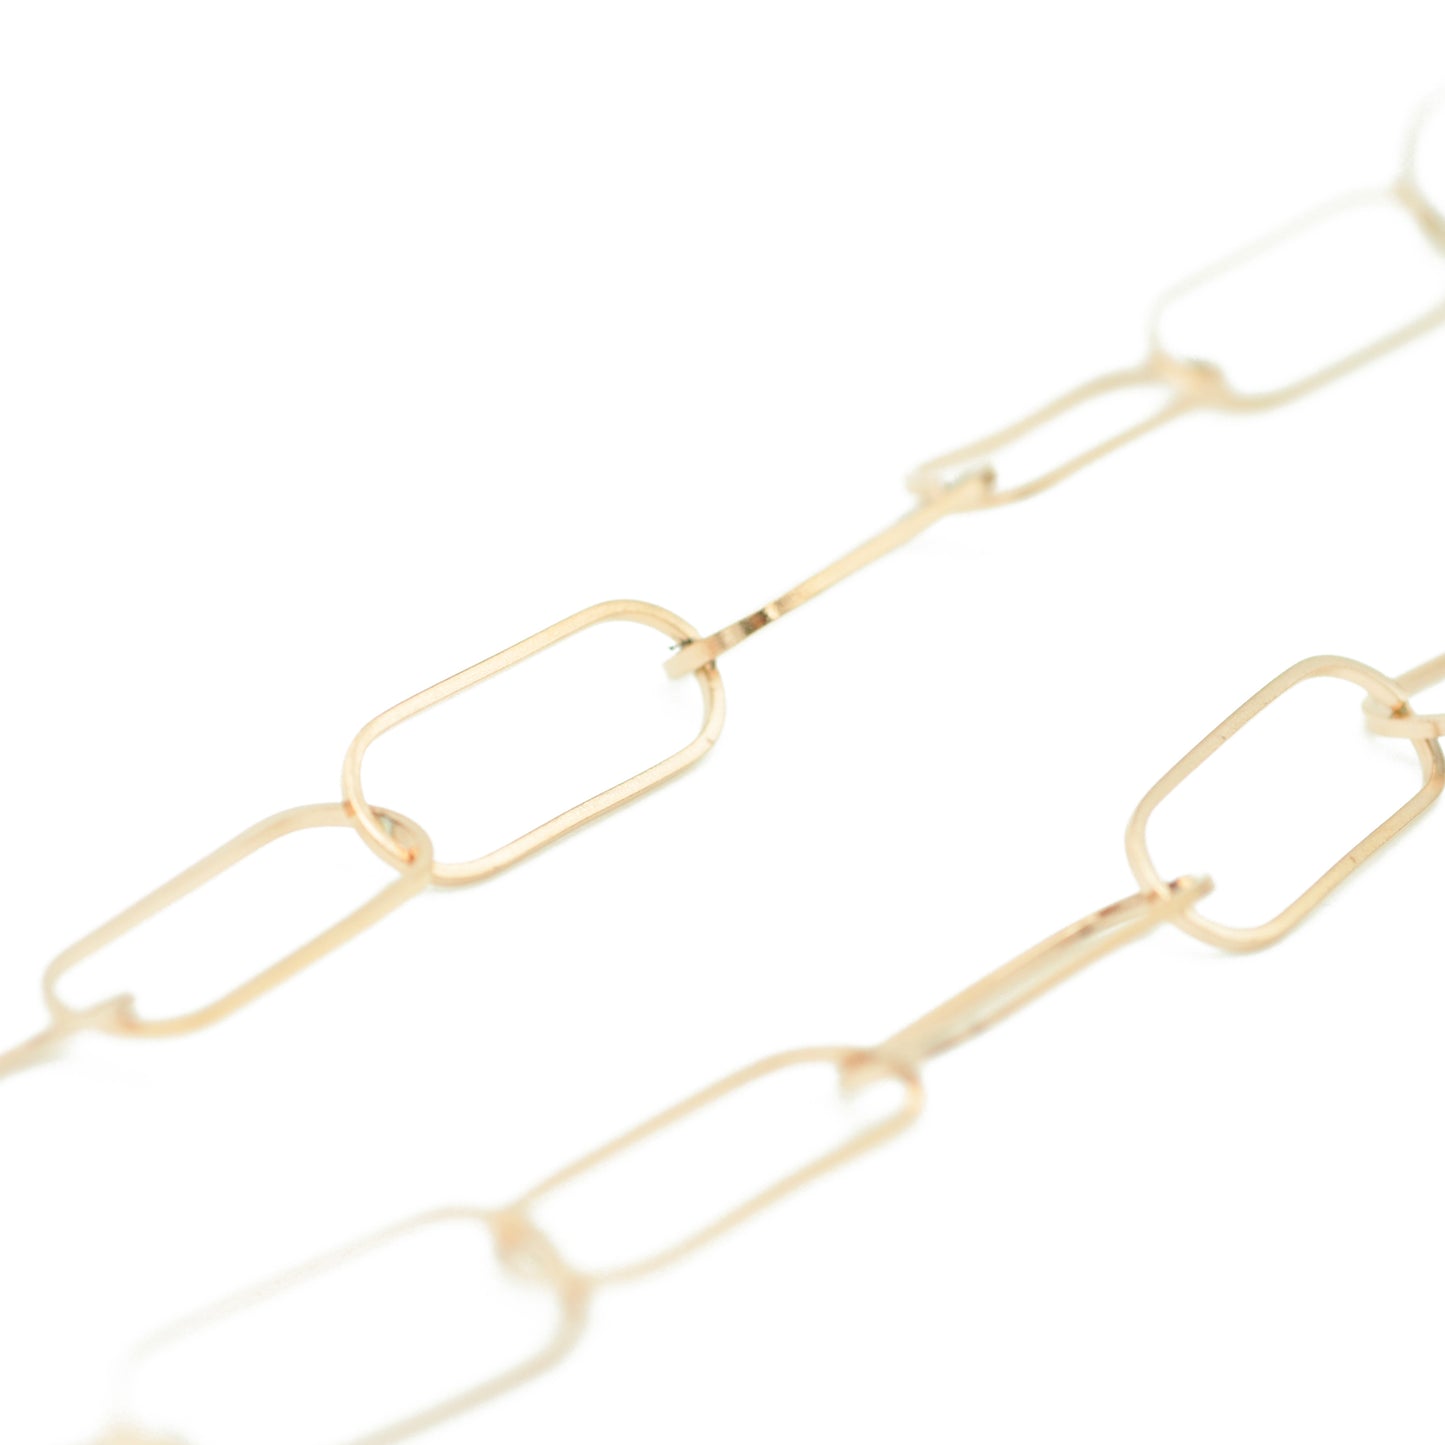 Delicate stainless steel chain / rose gold plated / 20 x 7 mm